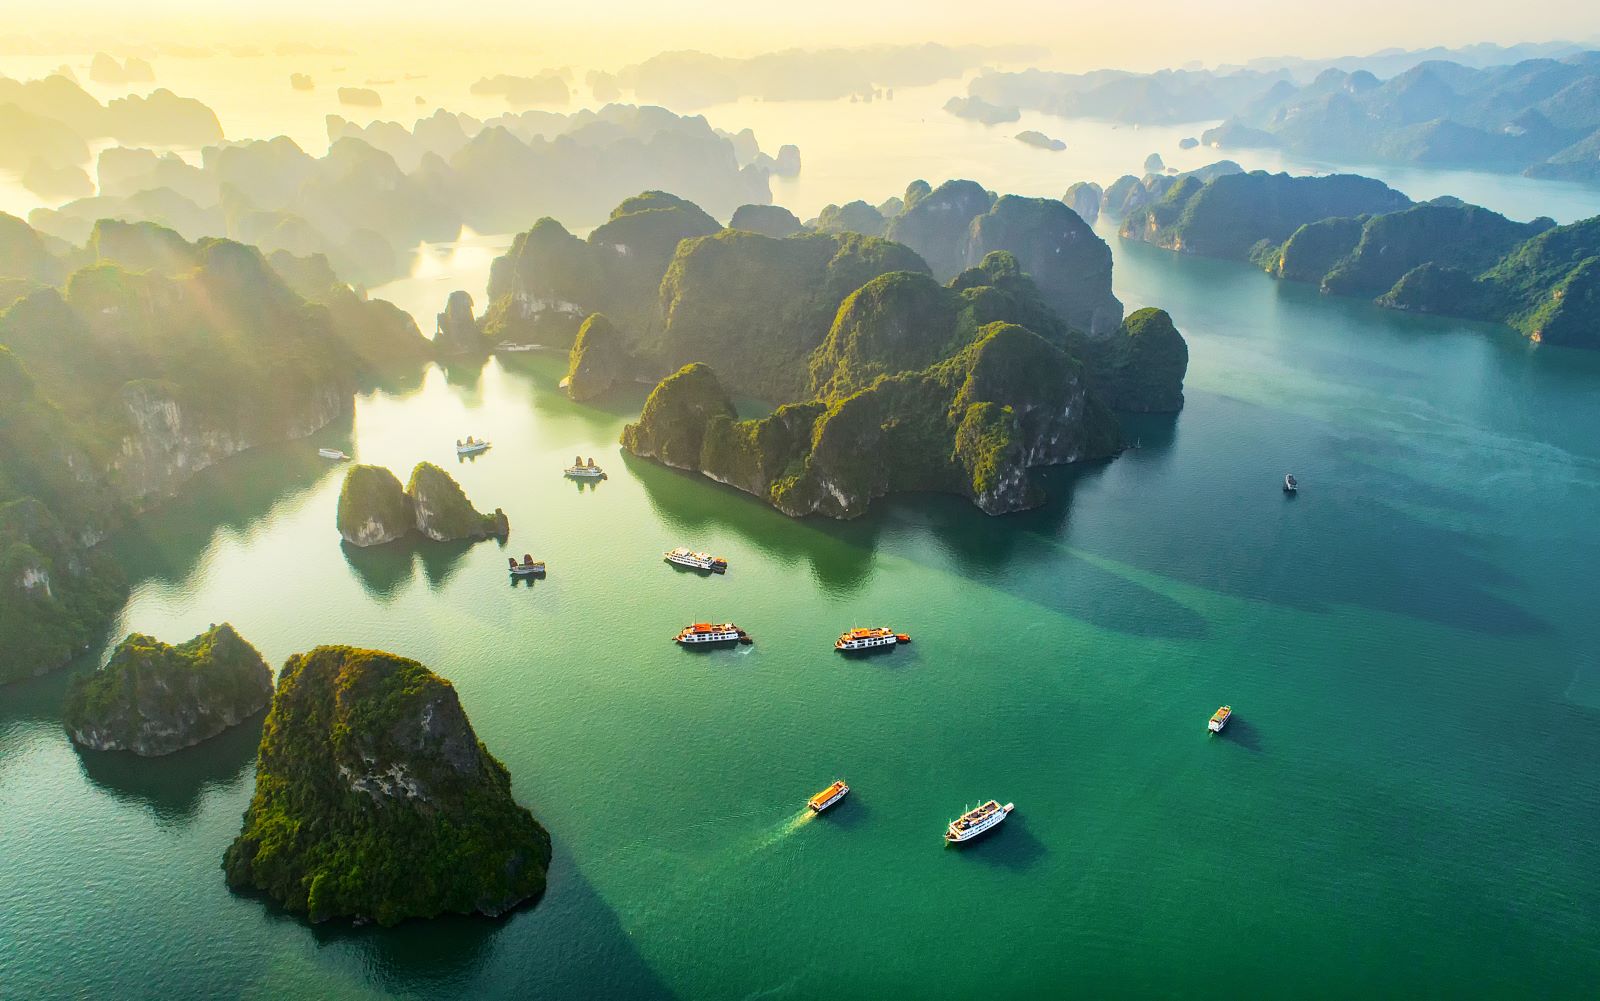 <p class="wp-caption-text">Image credit: Shutterstock / Nguyen Quang Ngoc Tonkin</p>  <p><span>Halong Bay, a UNESCO World Heritage site in northeastern Vietnam, is celebrated for its ethereal landscape of limestone karsts and islands rising from the emerald waters of the Gulf of Tonkin. This natural wonder is best experienced aboard a traditional junk boat, allowing visitors to navigate through the bay’s myriad islands and islets, discovering secluded beaches, hidden caves, and floating villages. The tranquil beauty of Halong Bay is unmatched, offering serene sunrises and sunsets that paint the sky in soft hues. For the adventurous, kayaking through the bay’s calm waters provides an up-close look at its geological wonders and the biodiversity of its marine and coastal ecosystems. Halong Bay is a place of outstanding natural beauty and showcases Vietnam’s rich history, with archaeological sites dating back over 20,000 years.</span></p>